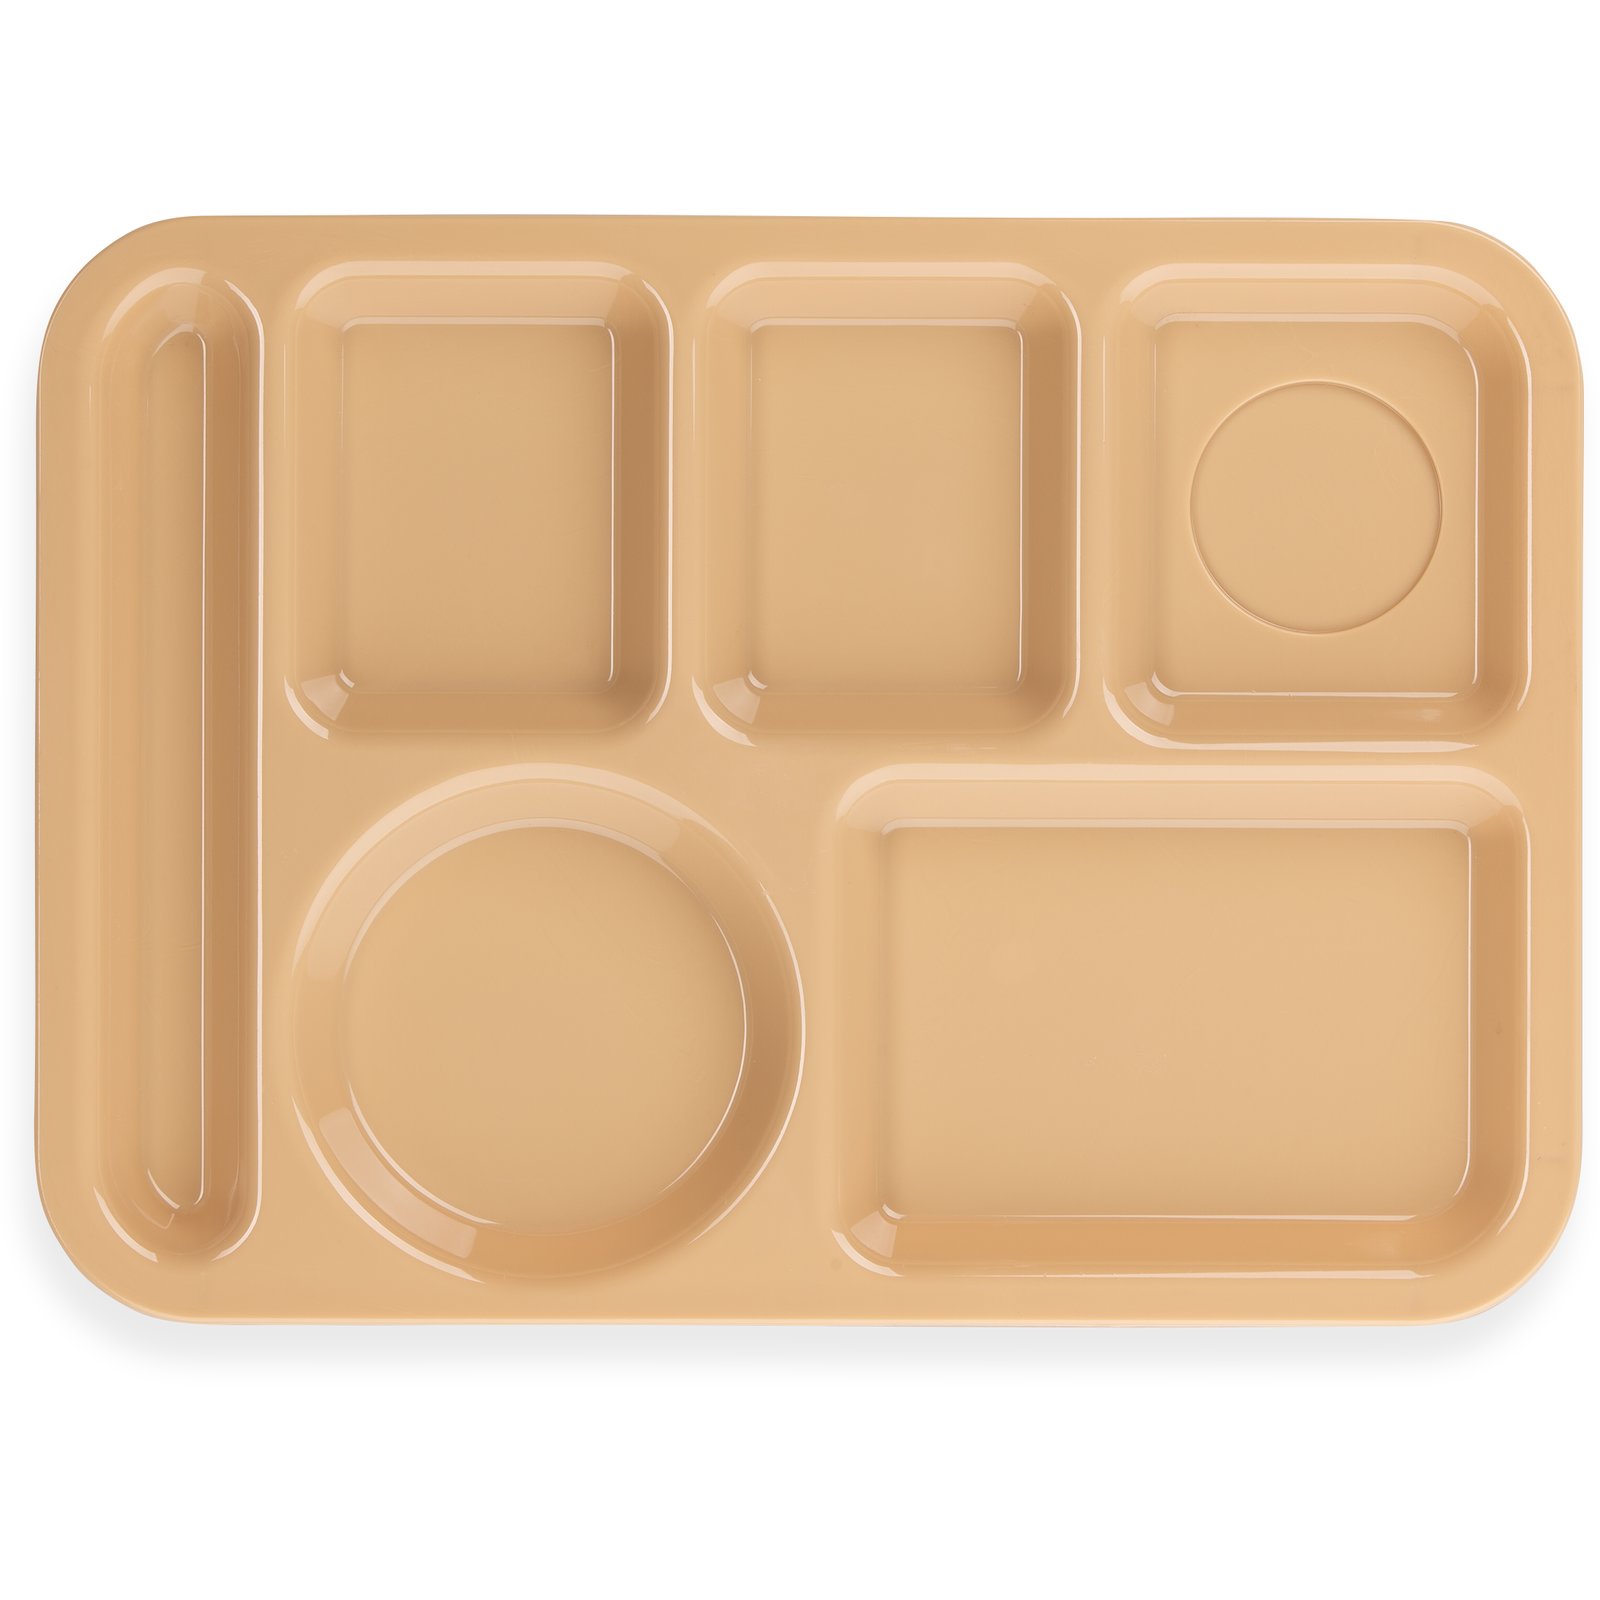 614PC25 - Left-Hand 6-Compartment Polycarbonate Tray 10 x 14 - Tan